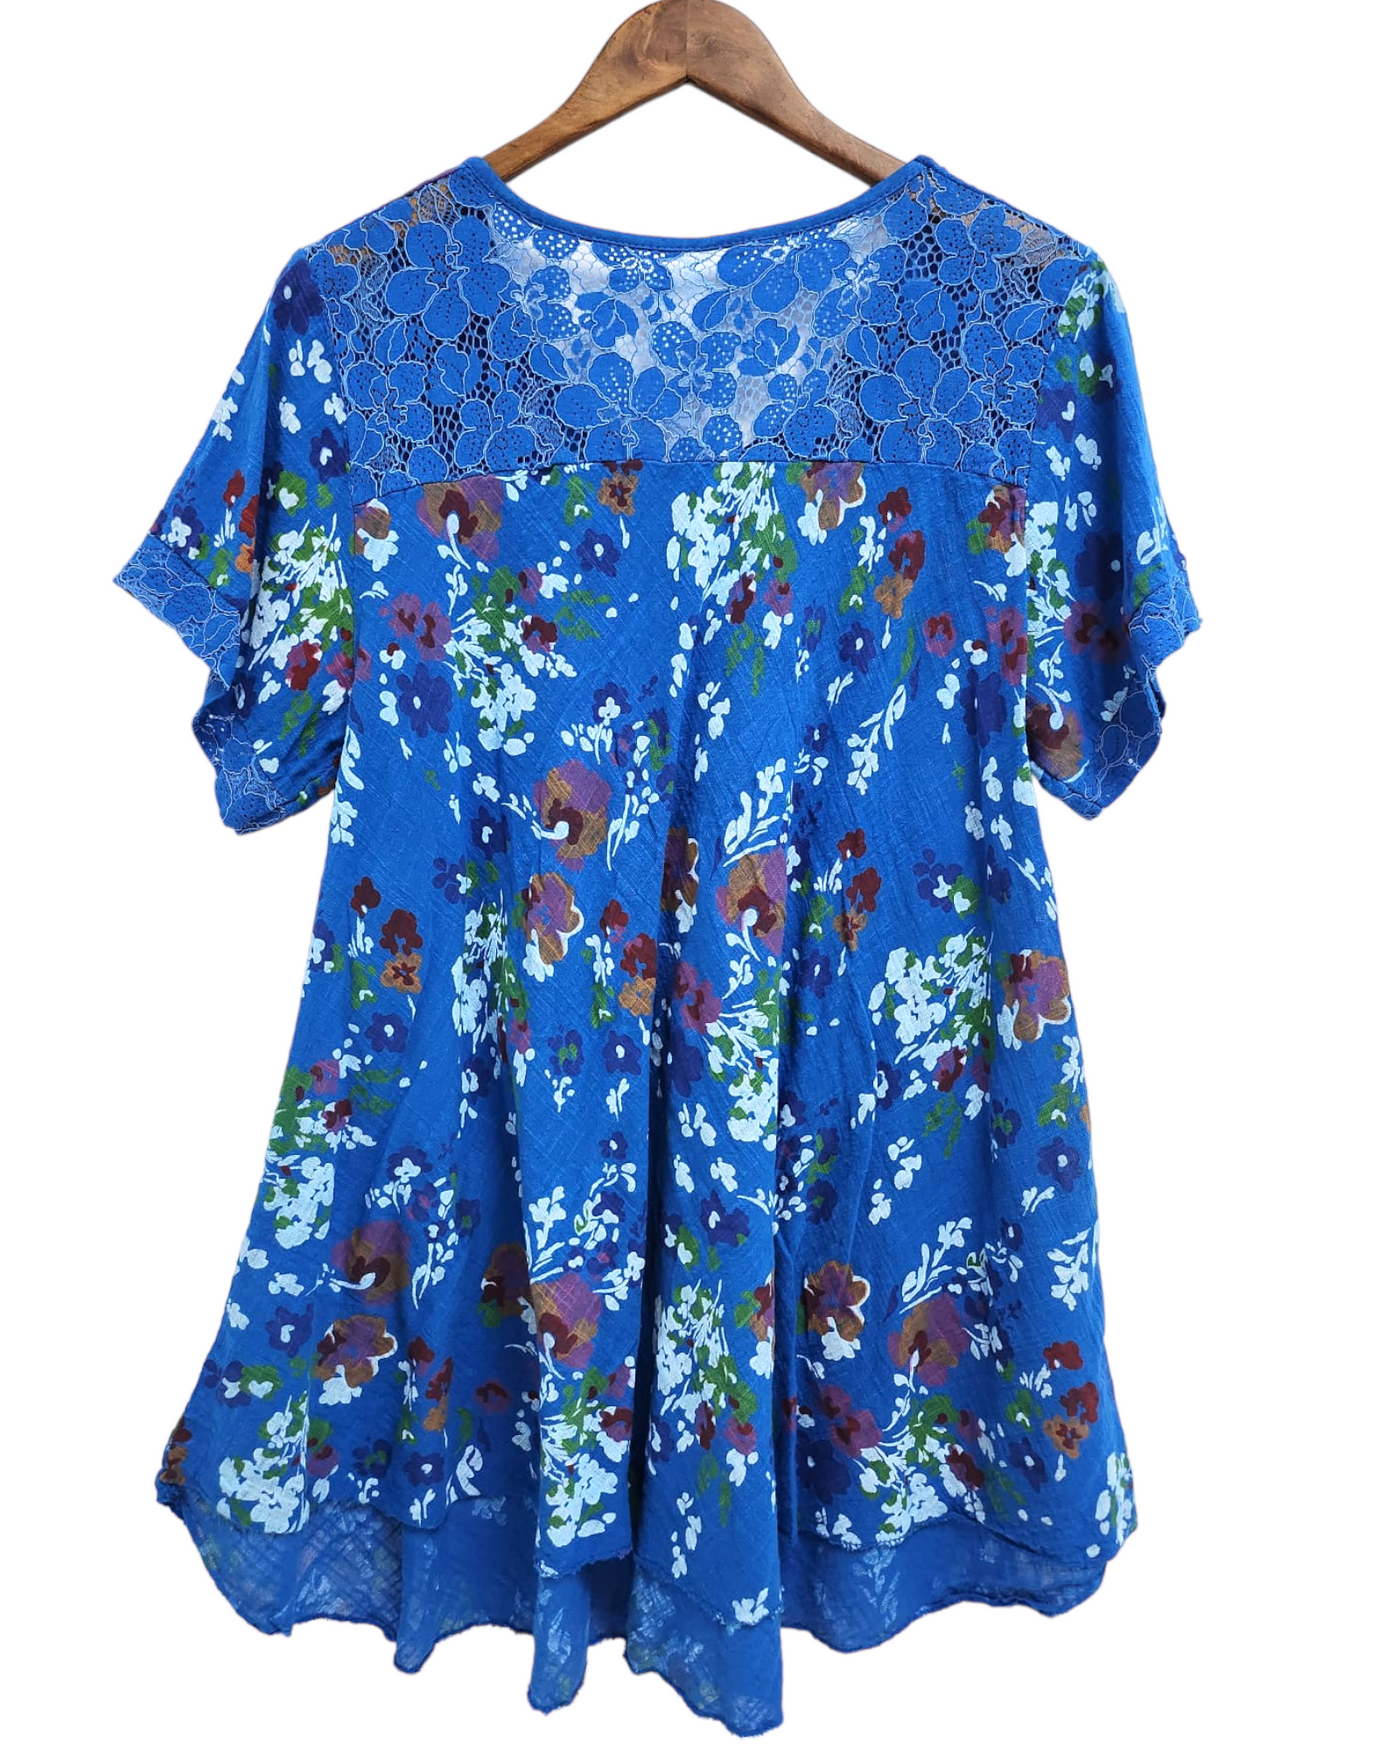 Italian Ditsy Floral Print Cotton Top